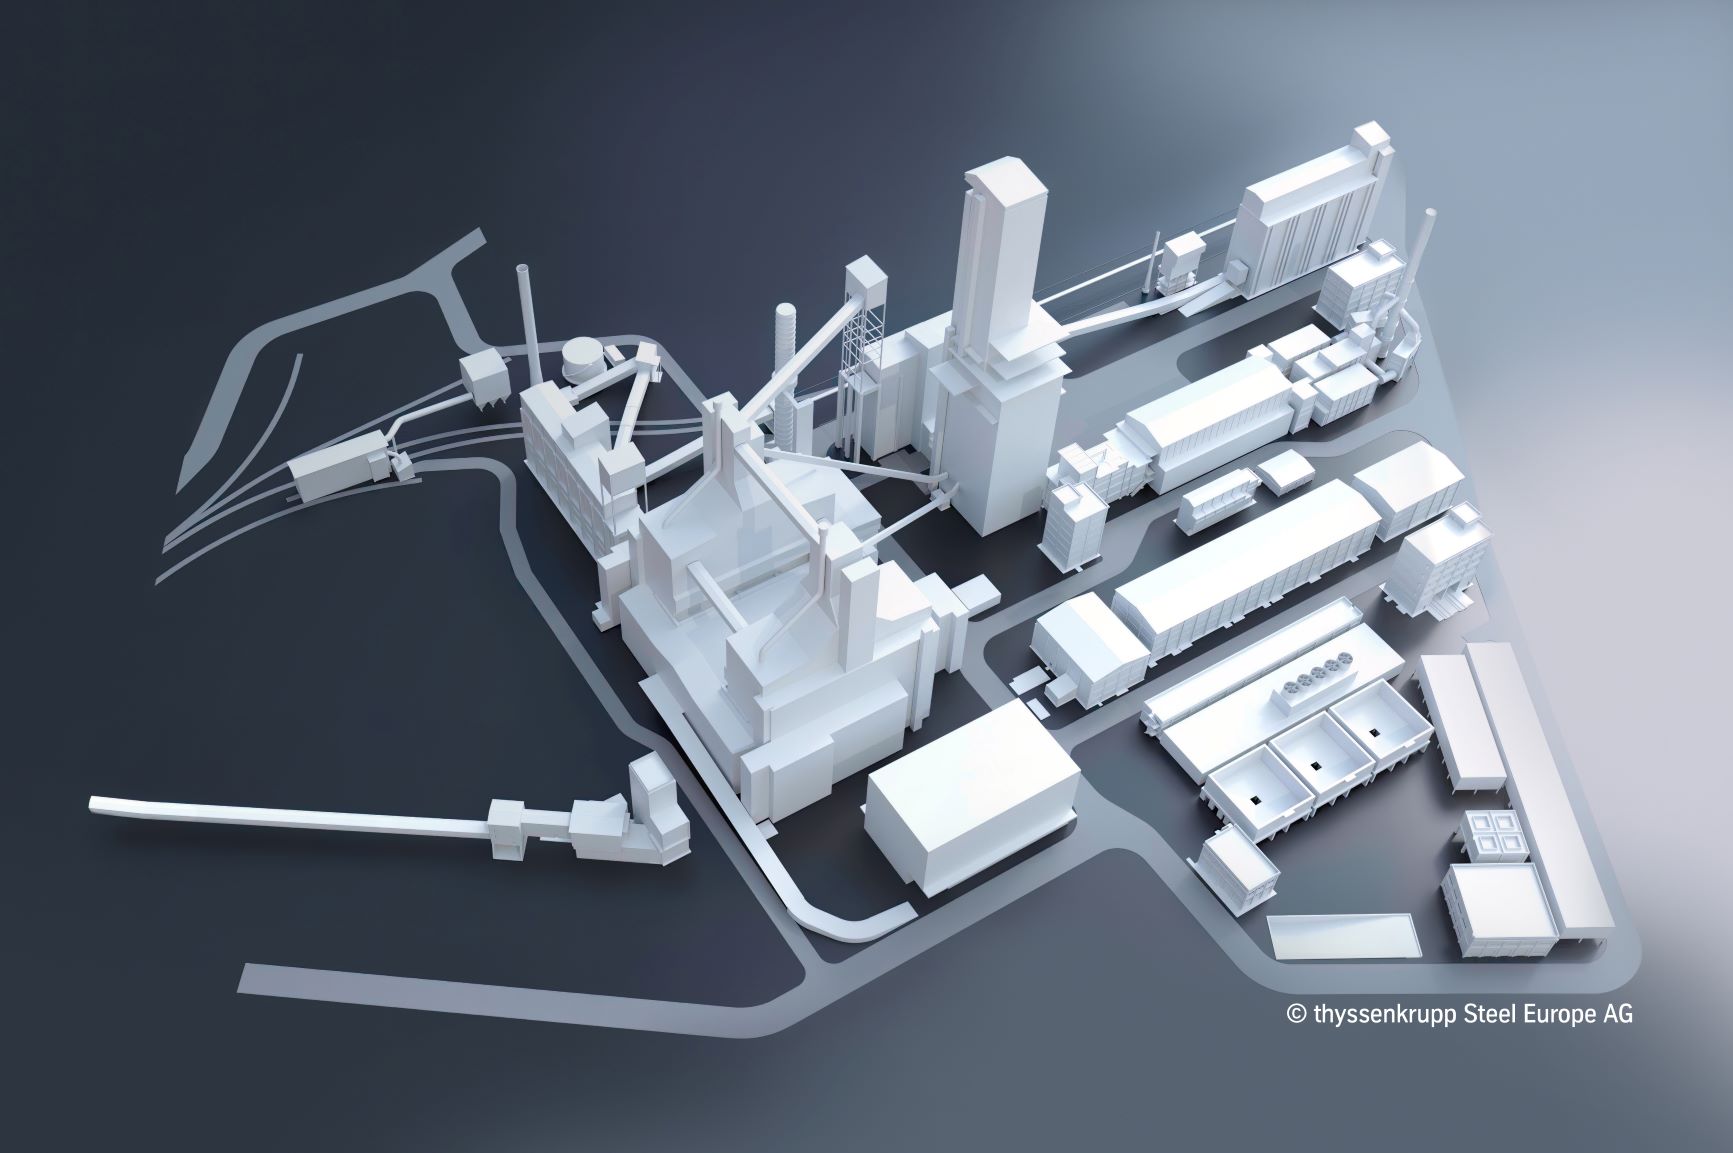 3D visualization of the DRI plant: thyssenkrupp Steel commissioned the SMS group with the engineering, supply and construction of the first hydrogen-powered direct reduction plant at the Duisburg site. This marks the start of one of the world's largest industrial decarbonization projects, which will already be able to avoid more than 3.5 million tons of CO₂ per year in the future. © thyssenkrupp Steel Europe AG